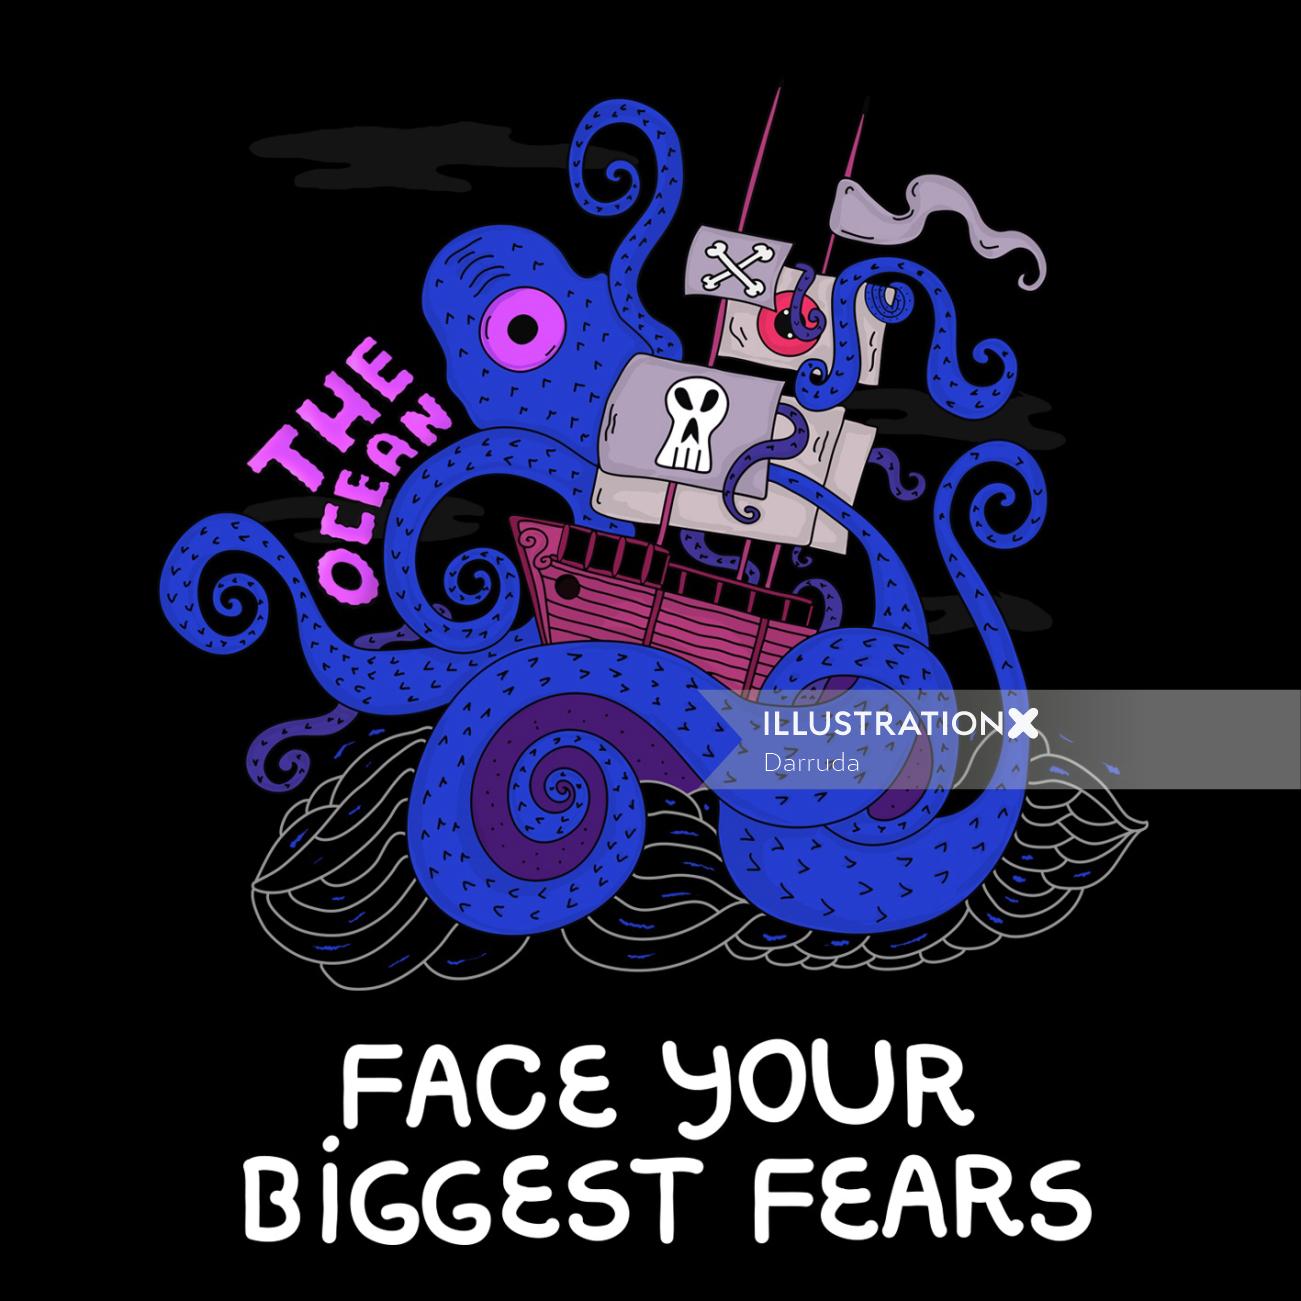 Typography face your biggest fears
